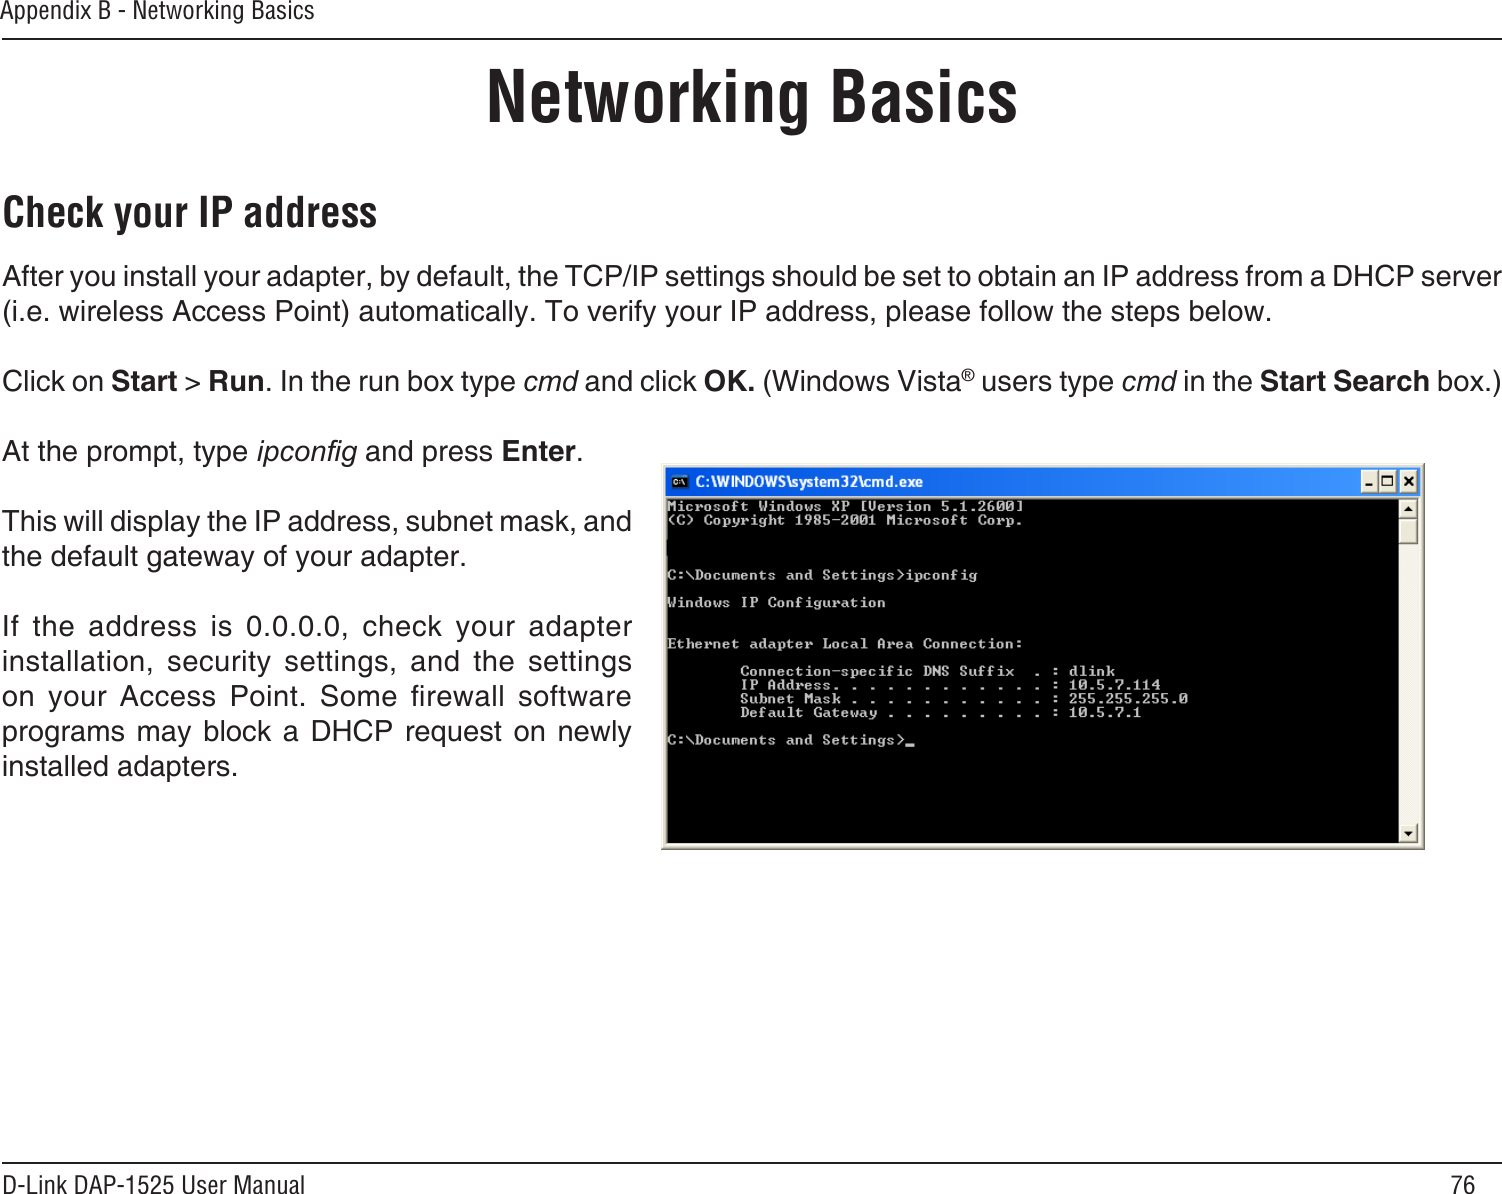 76D-Link DAP-1525 User ManualAppendix B - Networking BasicsNetworking BasicsCheck your IP addressAfter you install your adapter, by default, the TCP/IP settings should be set to obtain an IP address from a DHCP server (i.e. wireless Access Point) automatically. To verify your IP address, please follow the steps below.Click on Start &gt; Run. In the run box type cmd and click OK. (Windows Vista® users type cmd in the Start Search box.)At the prompt, type ipcong and press Enter.This will display the IP address, subnet mask, and the default gateway of your adapter.If  the  address  is  0.0.0.0,  check  your  adapter installation,  security  settings,  and  the  settings on  your  Access  Point.  Some  rewall  software programs may block a  DHCP  request  on  newly installed adapters. 